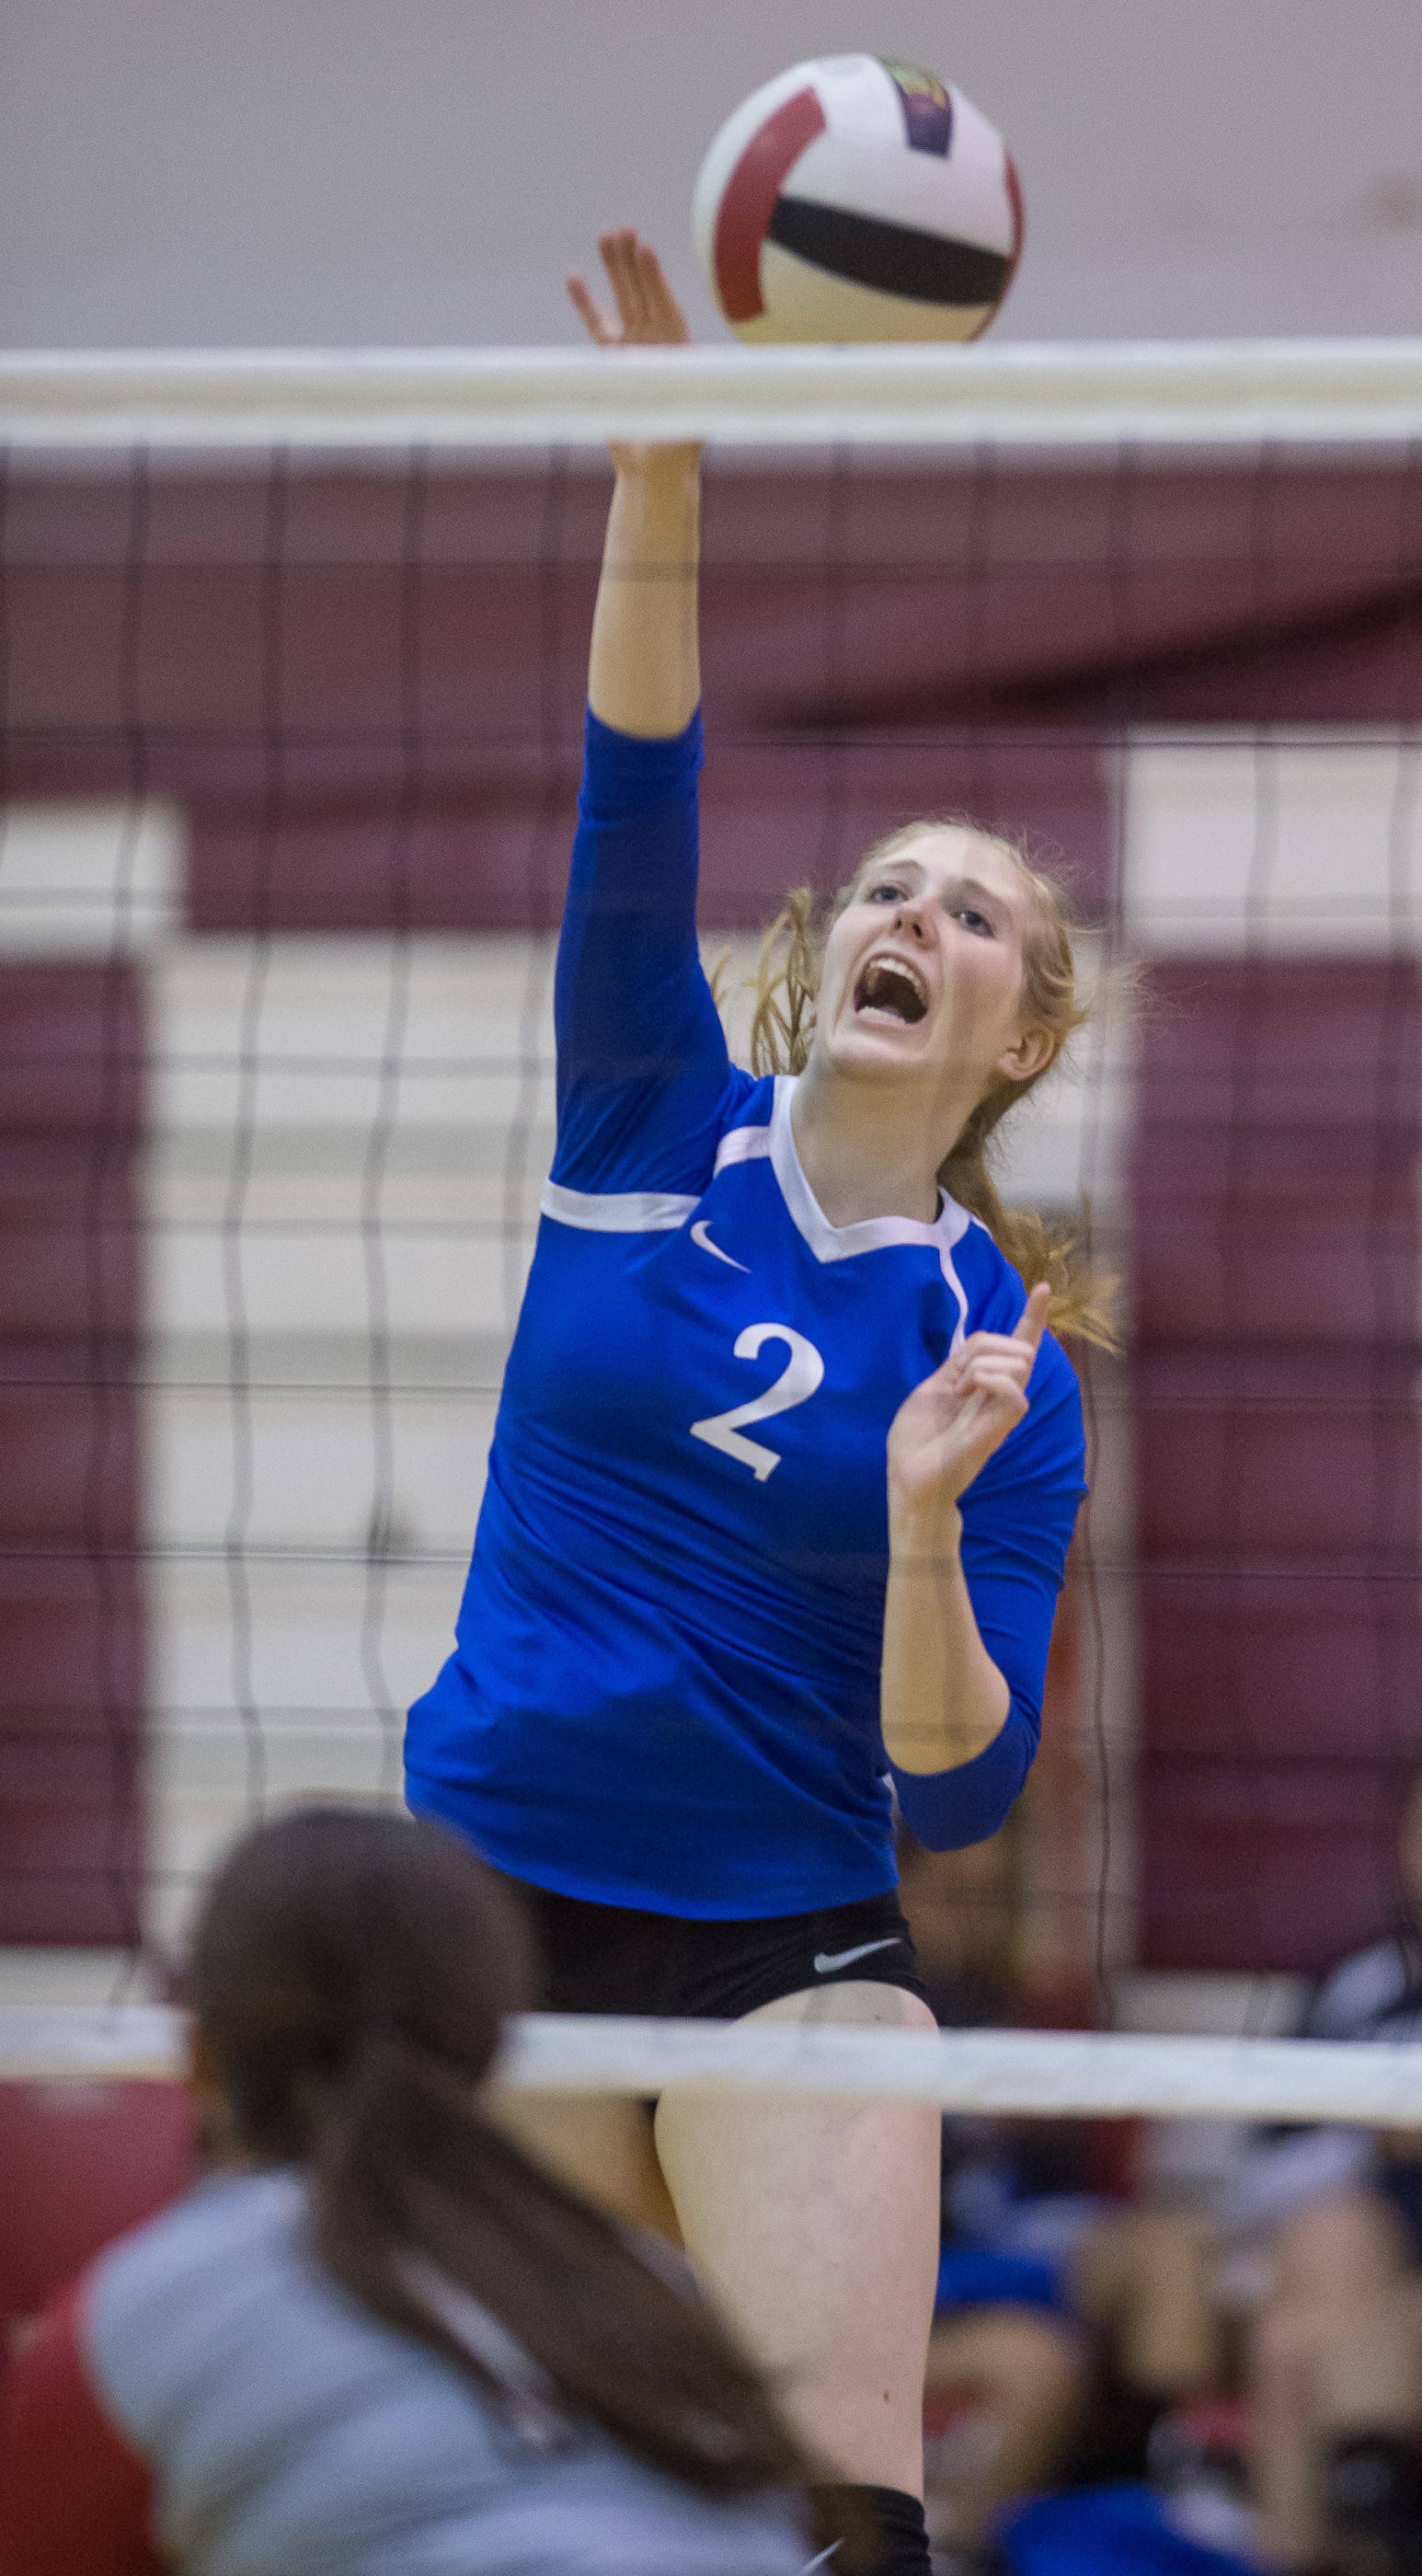 Thunder Mountain’s Mary Landes spikes against Wrangell at the Juneau Invitational Volleyball Extravaganza at JDHS on Friday, Oct. 13, 2017.